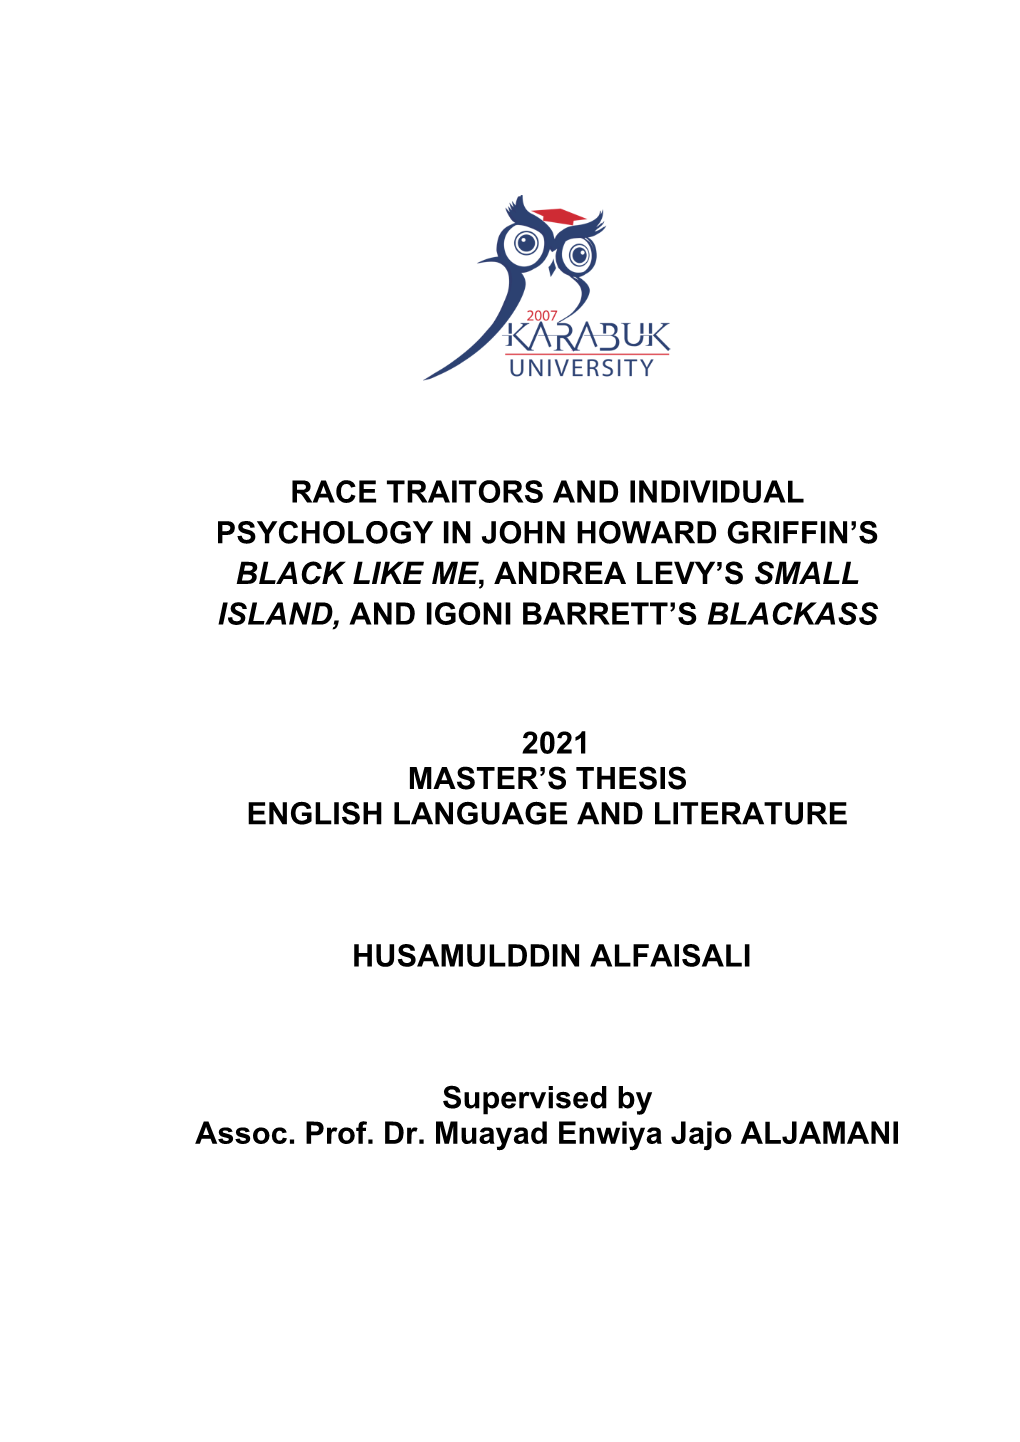 Race Traitors and Individual Psychology in John Howard Griffin's Black Like Me, Andrea Levy's Small Island, and Igoni Barret